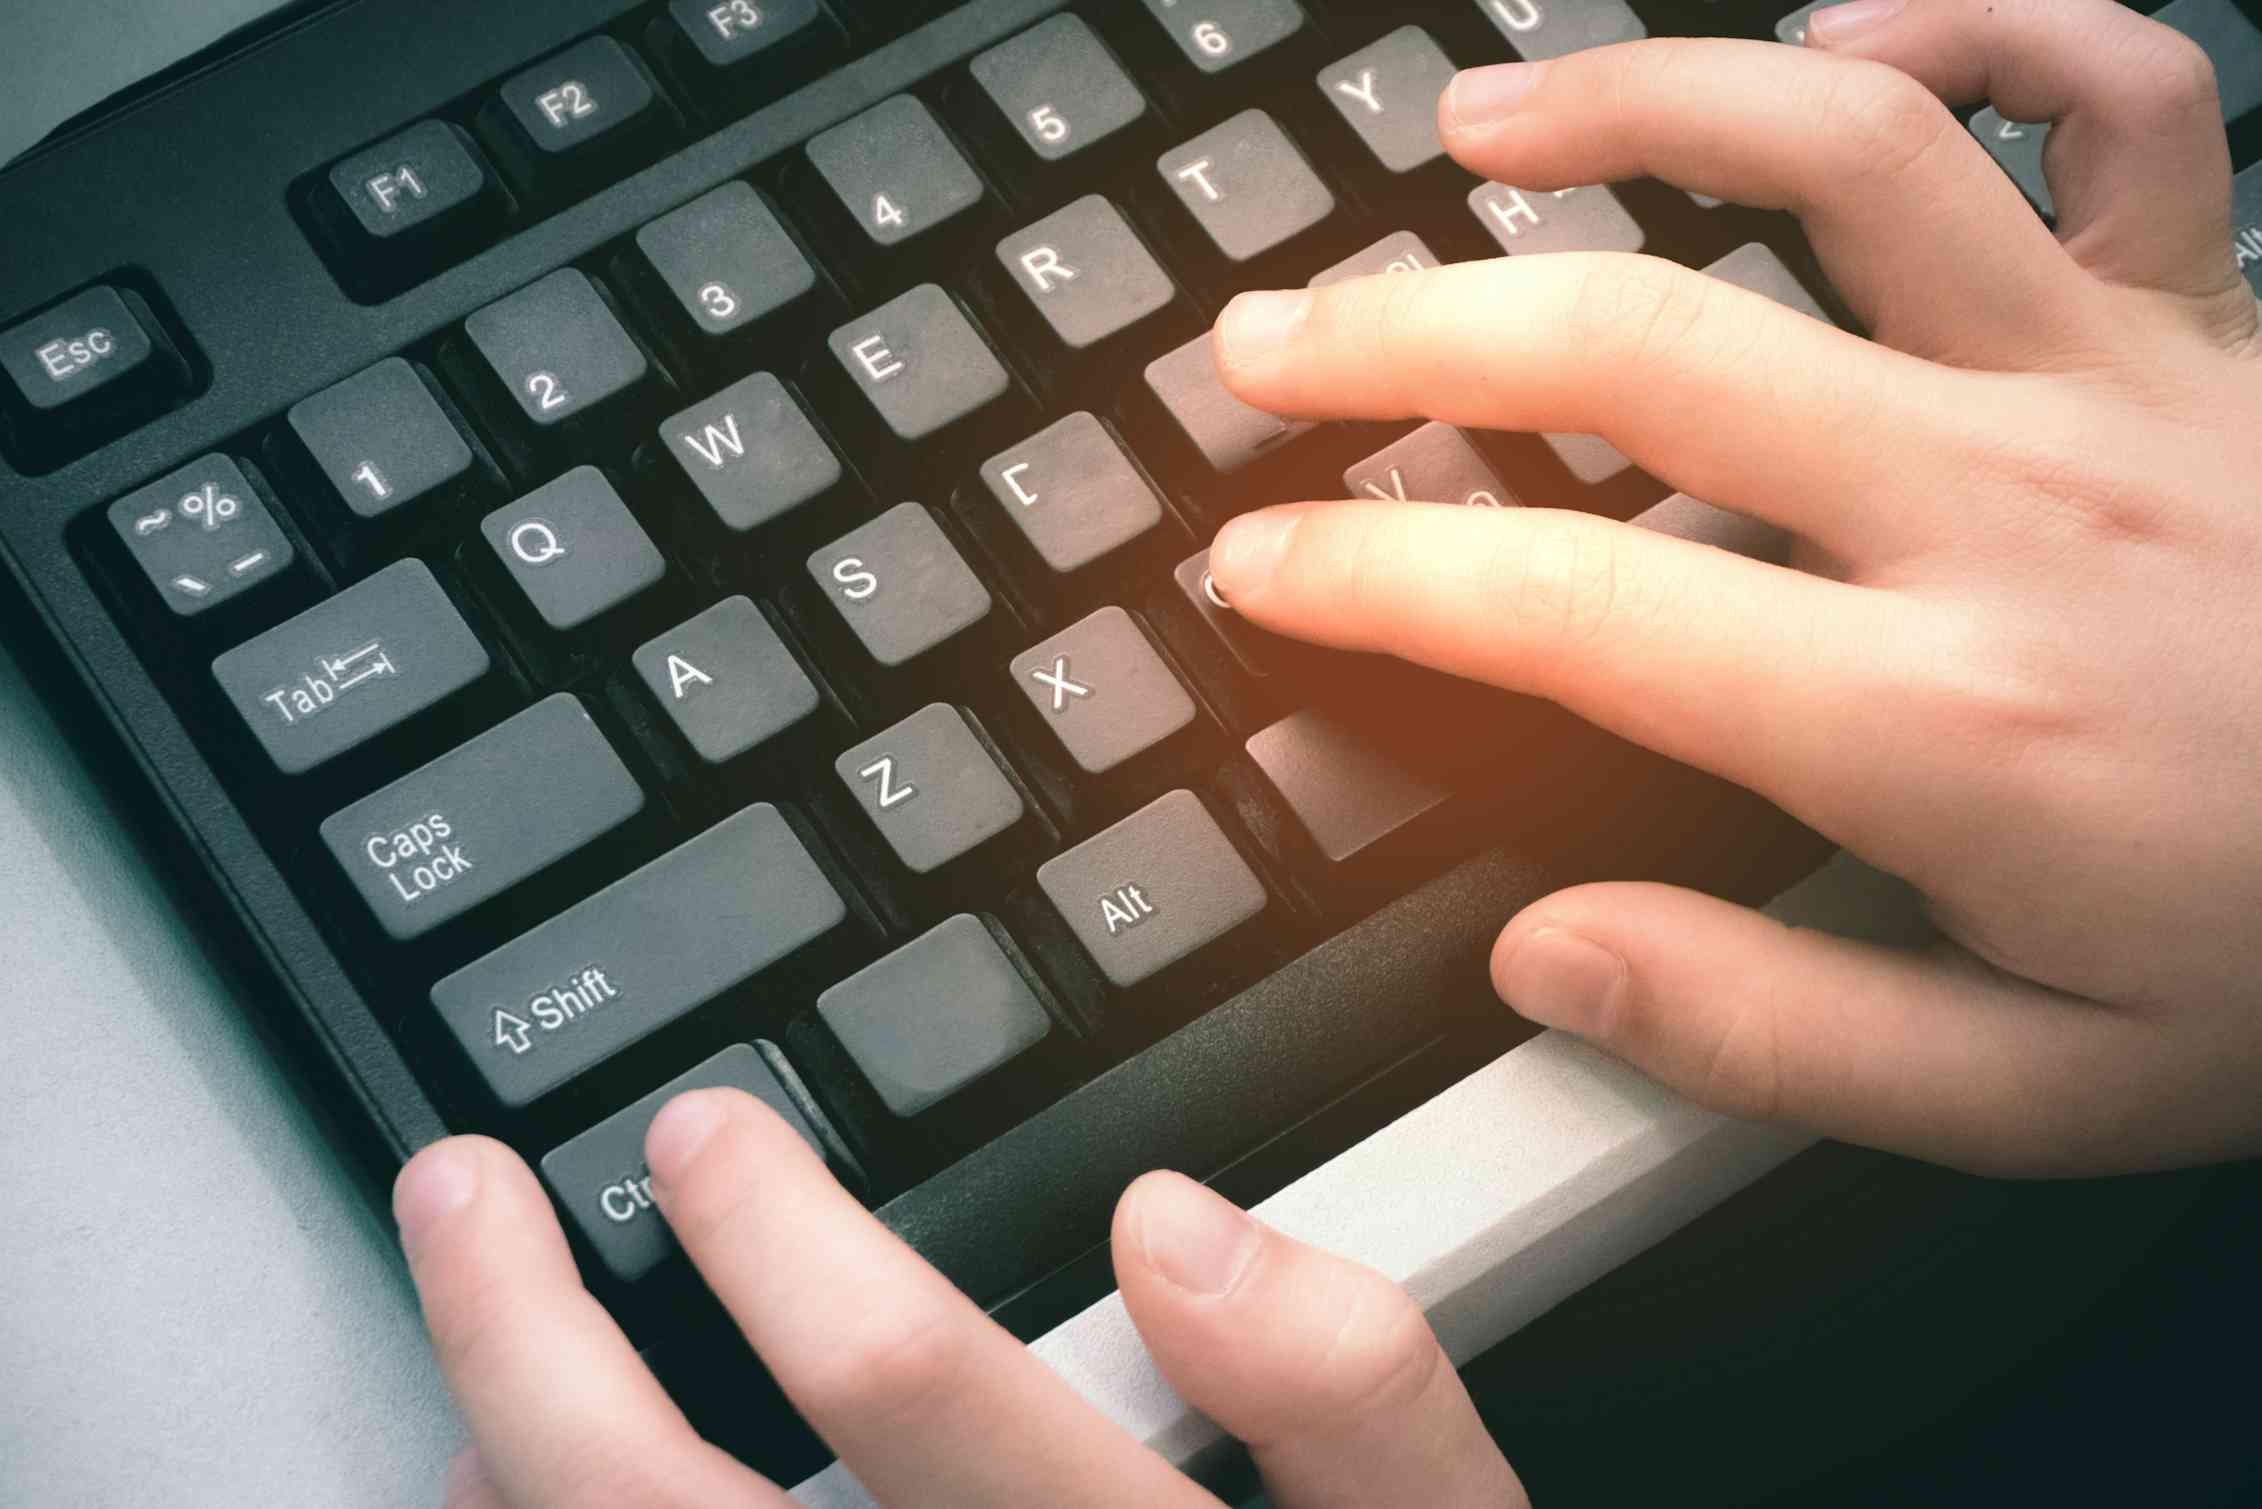 Hands on a keyboard using the Ctrl C copy function